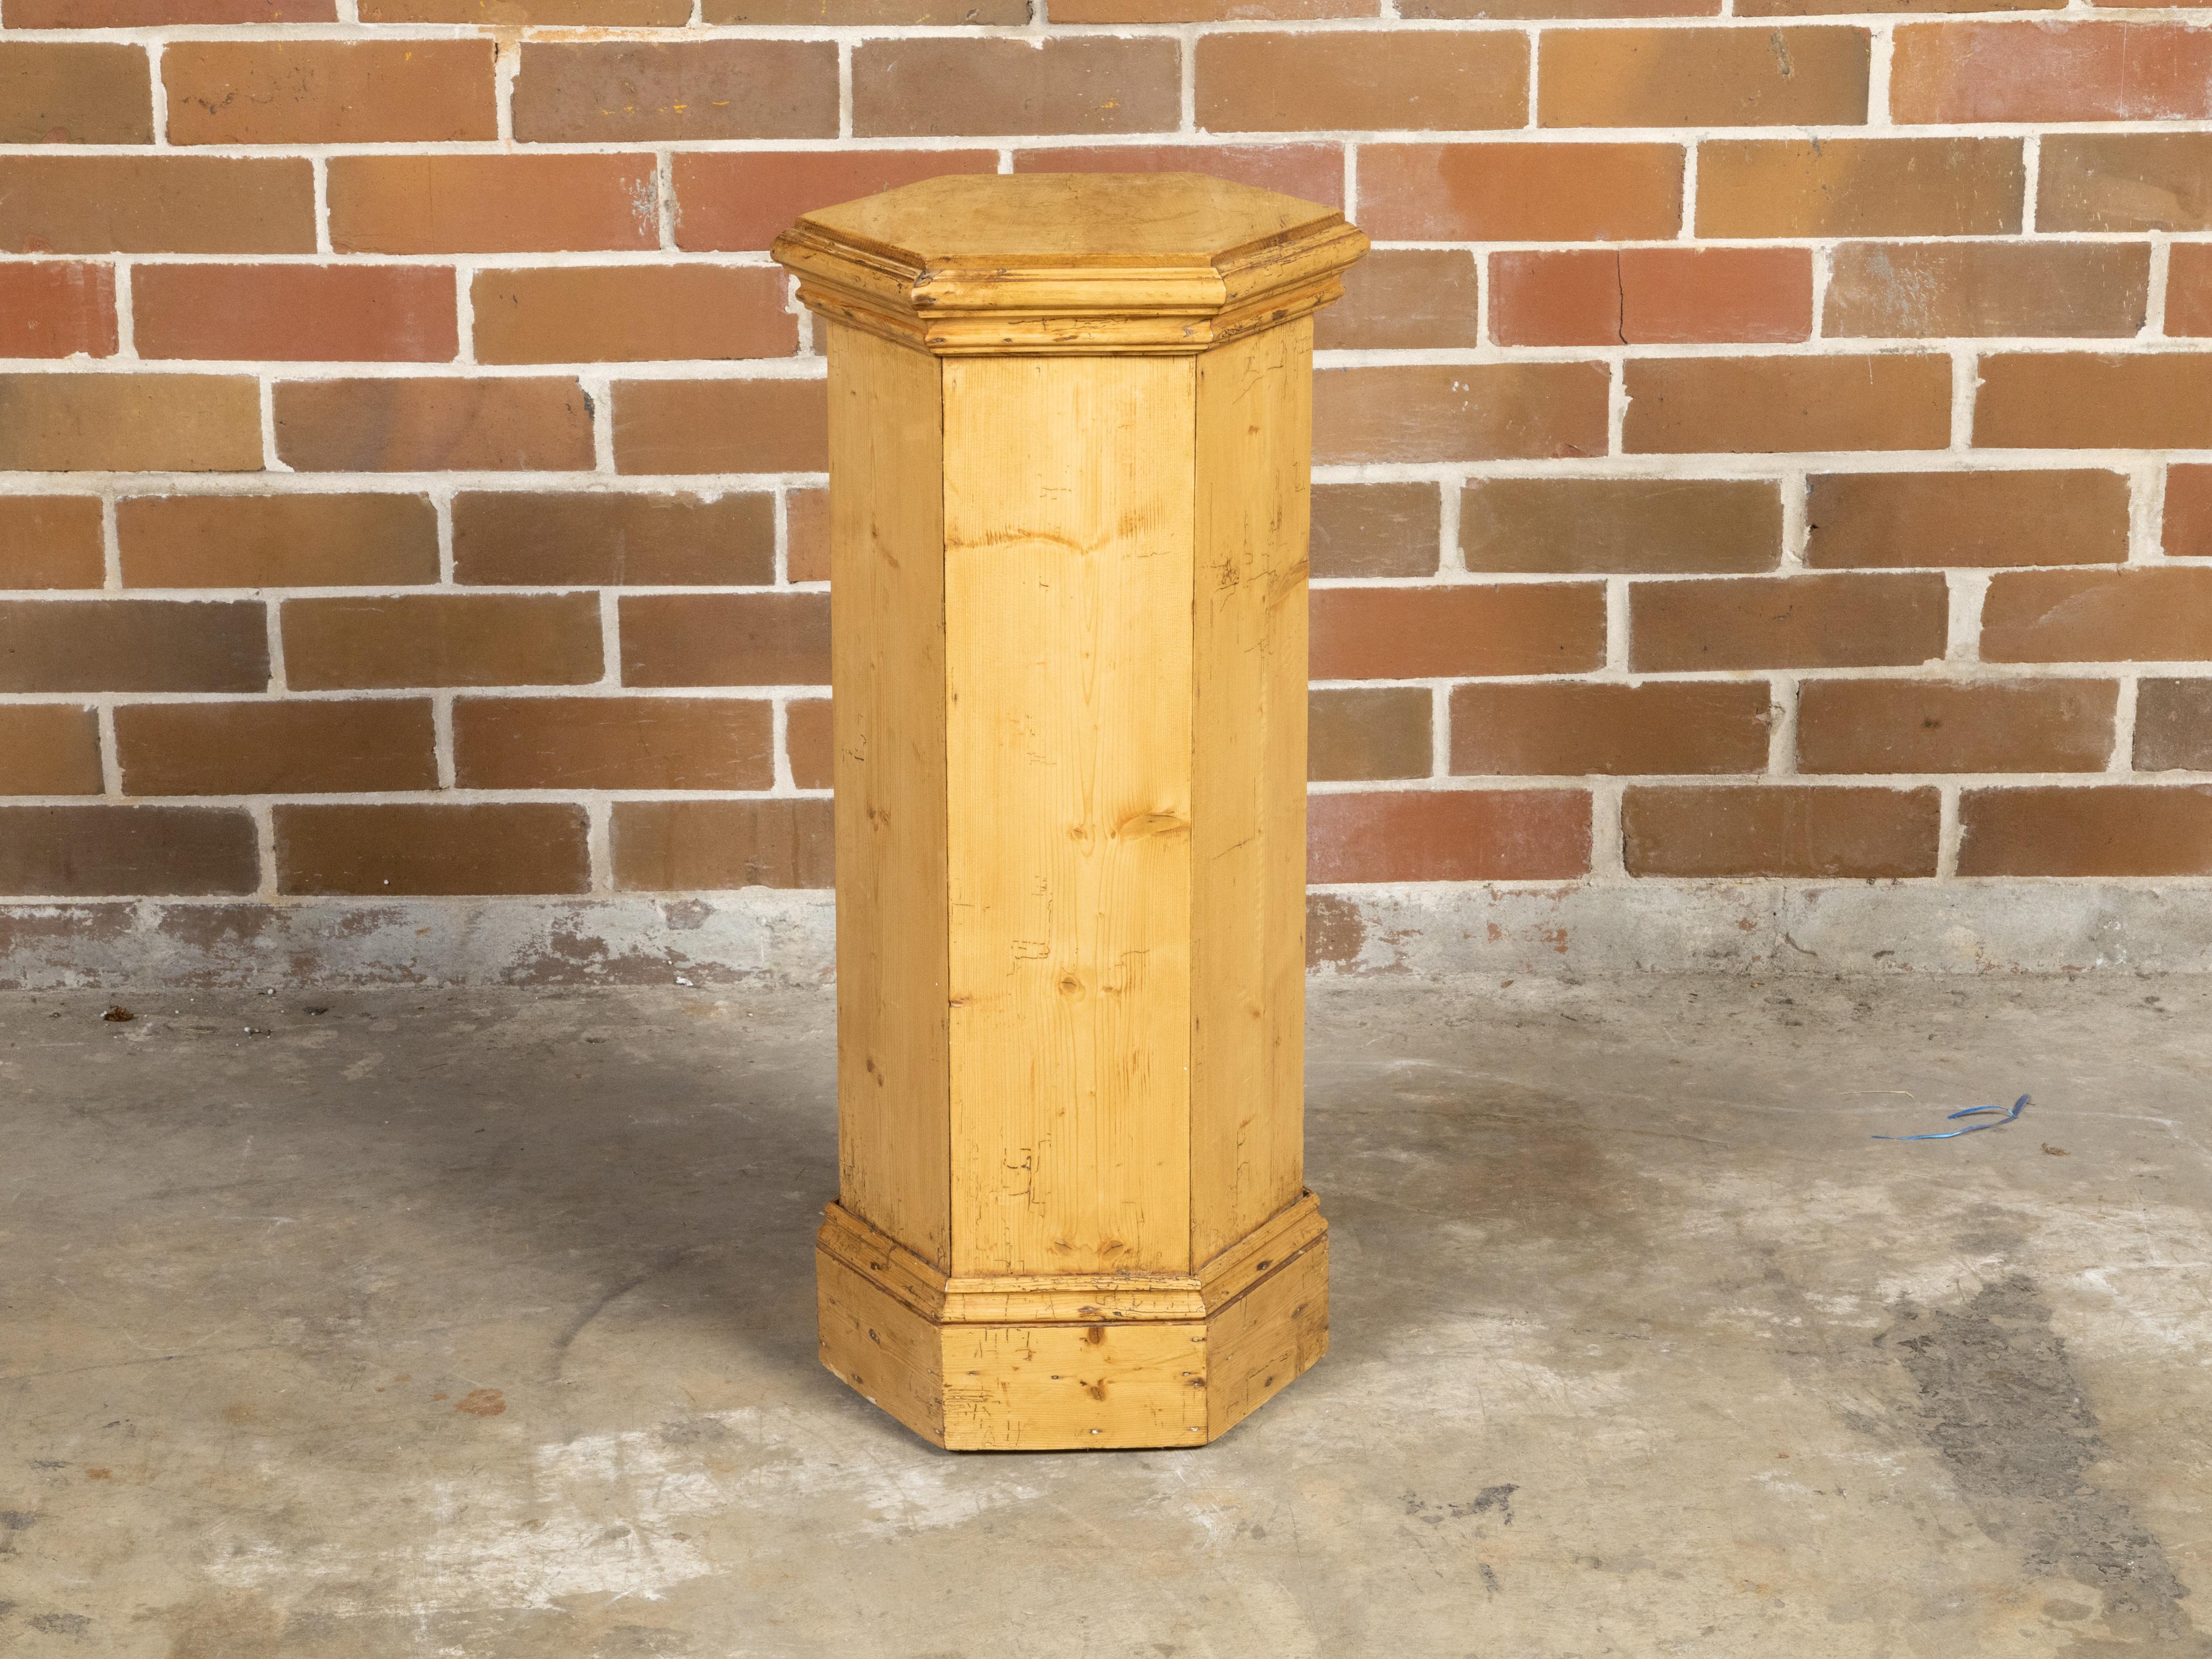 An English Turn of the Century rustic pine pedestal from the early 20th century, with hexagonal design and nicely weathered patina. Created in England at the Turn of the Century which saw the transition between the 19th to the 20th, this pine